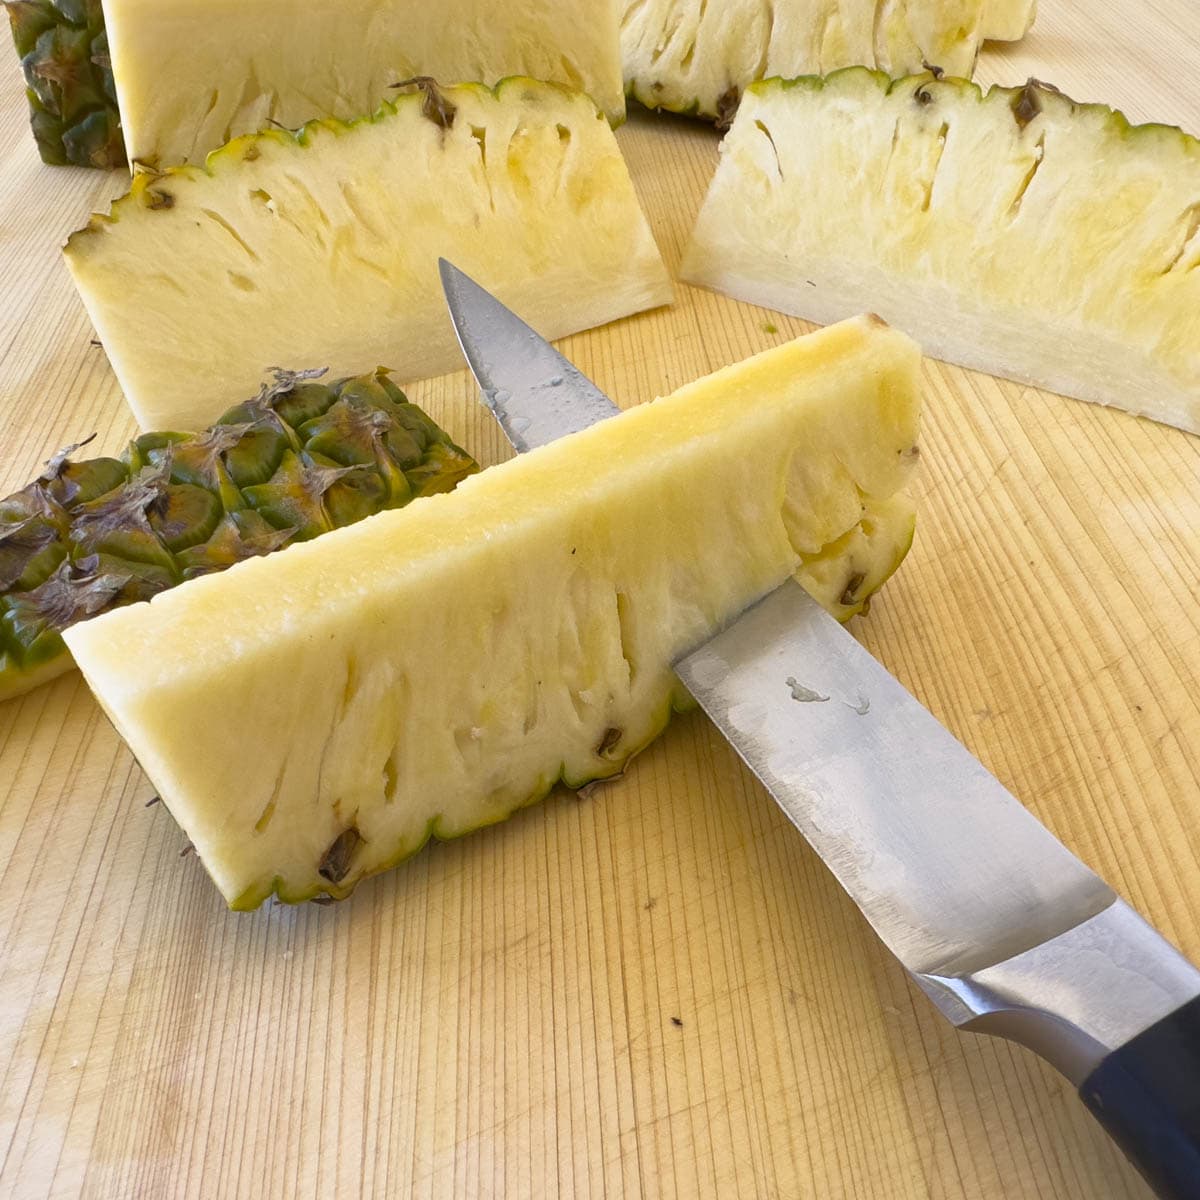 Cutting the tough skin off of pineapple spears.